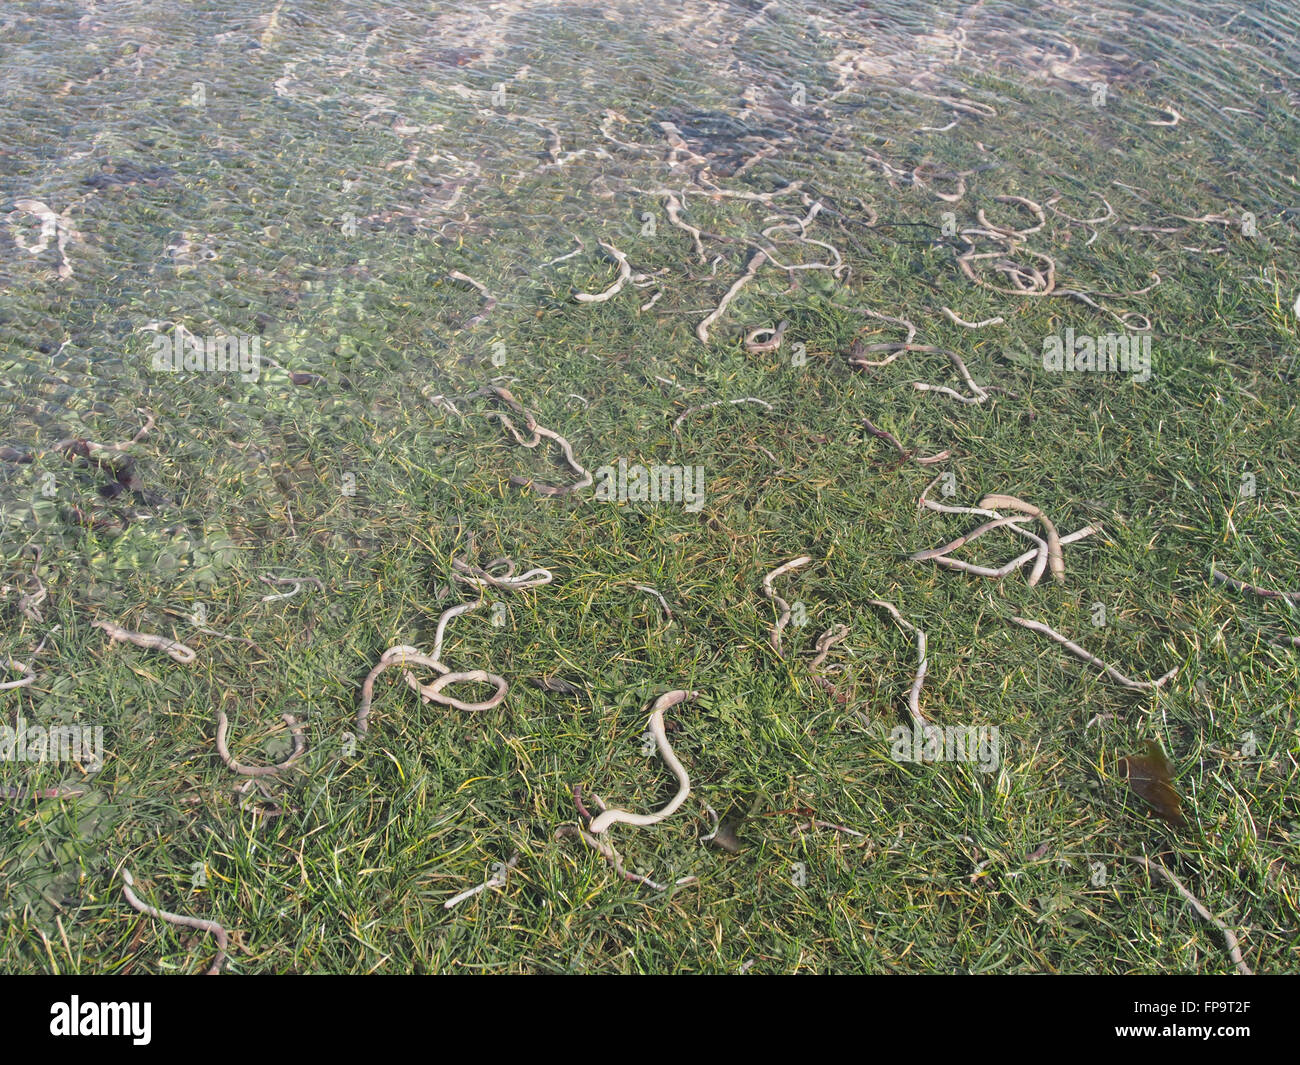 A multitude of Earthworms surface on a flooded field Stock Photo